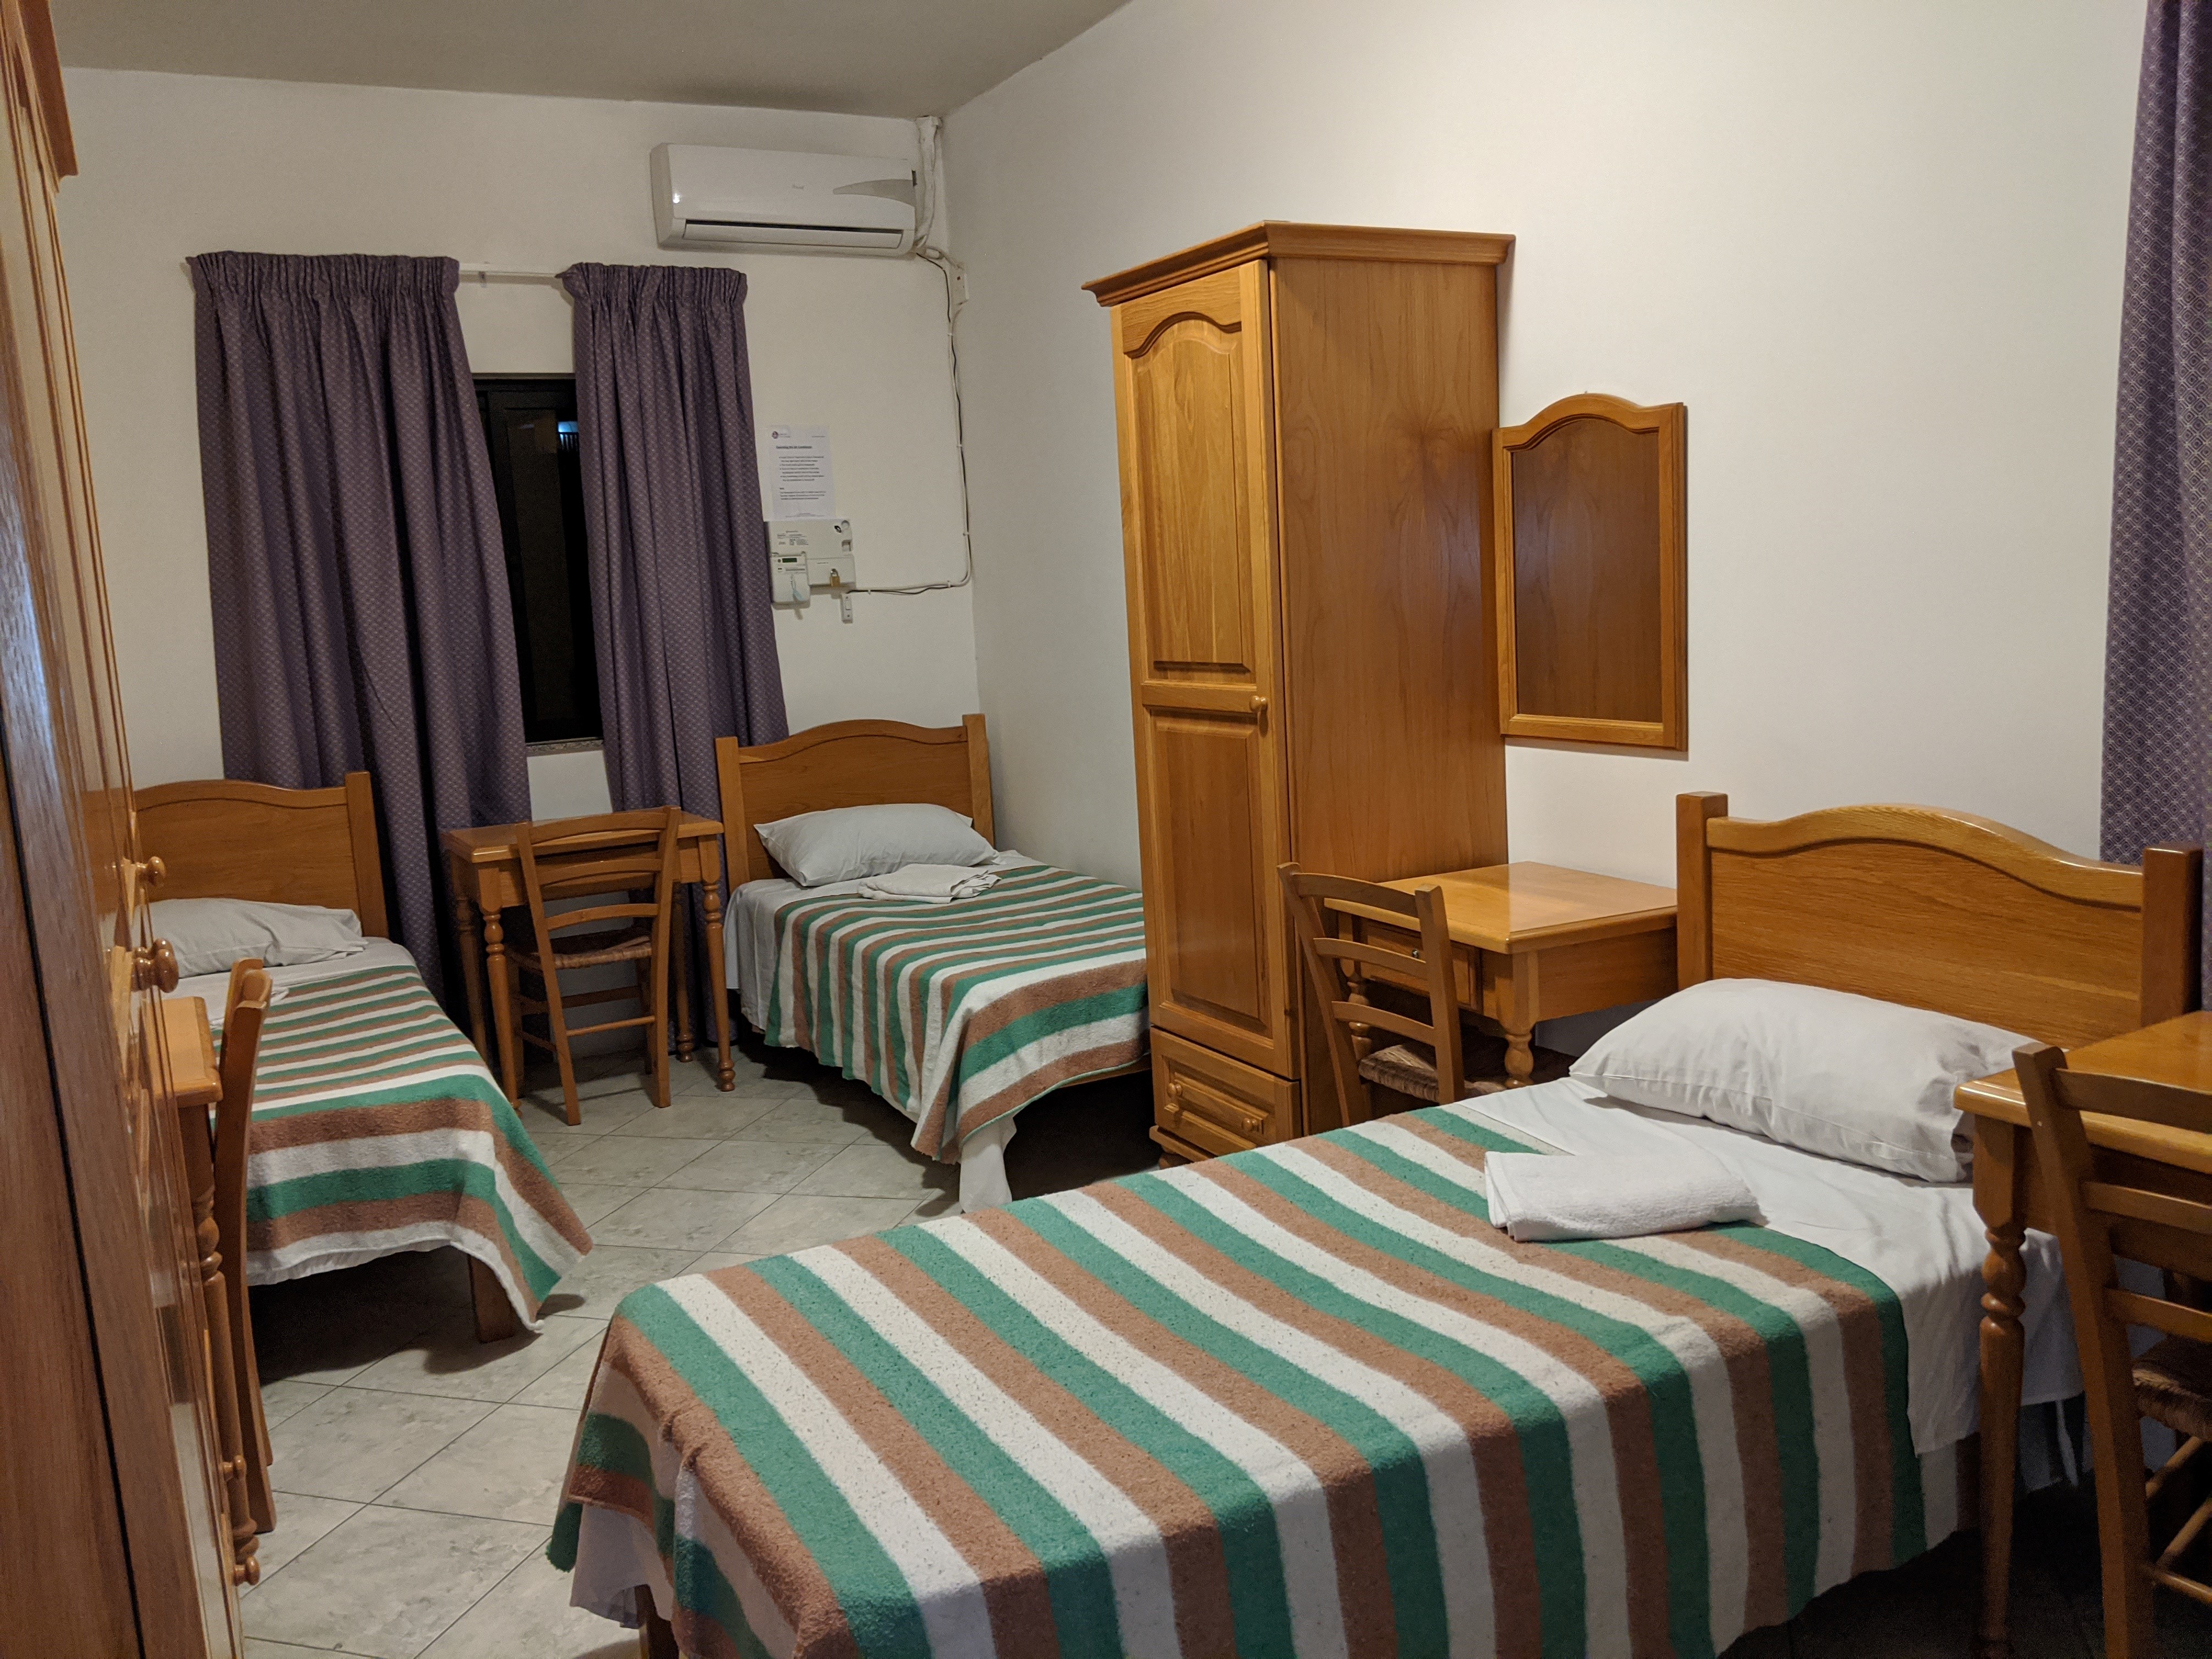 Study English in Malta - GSE Residence bedrooms next to school